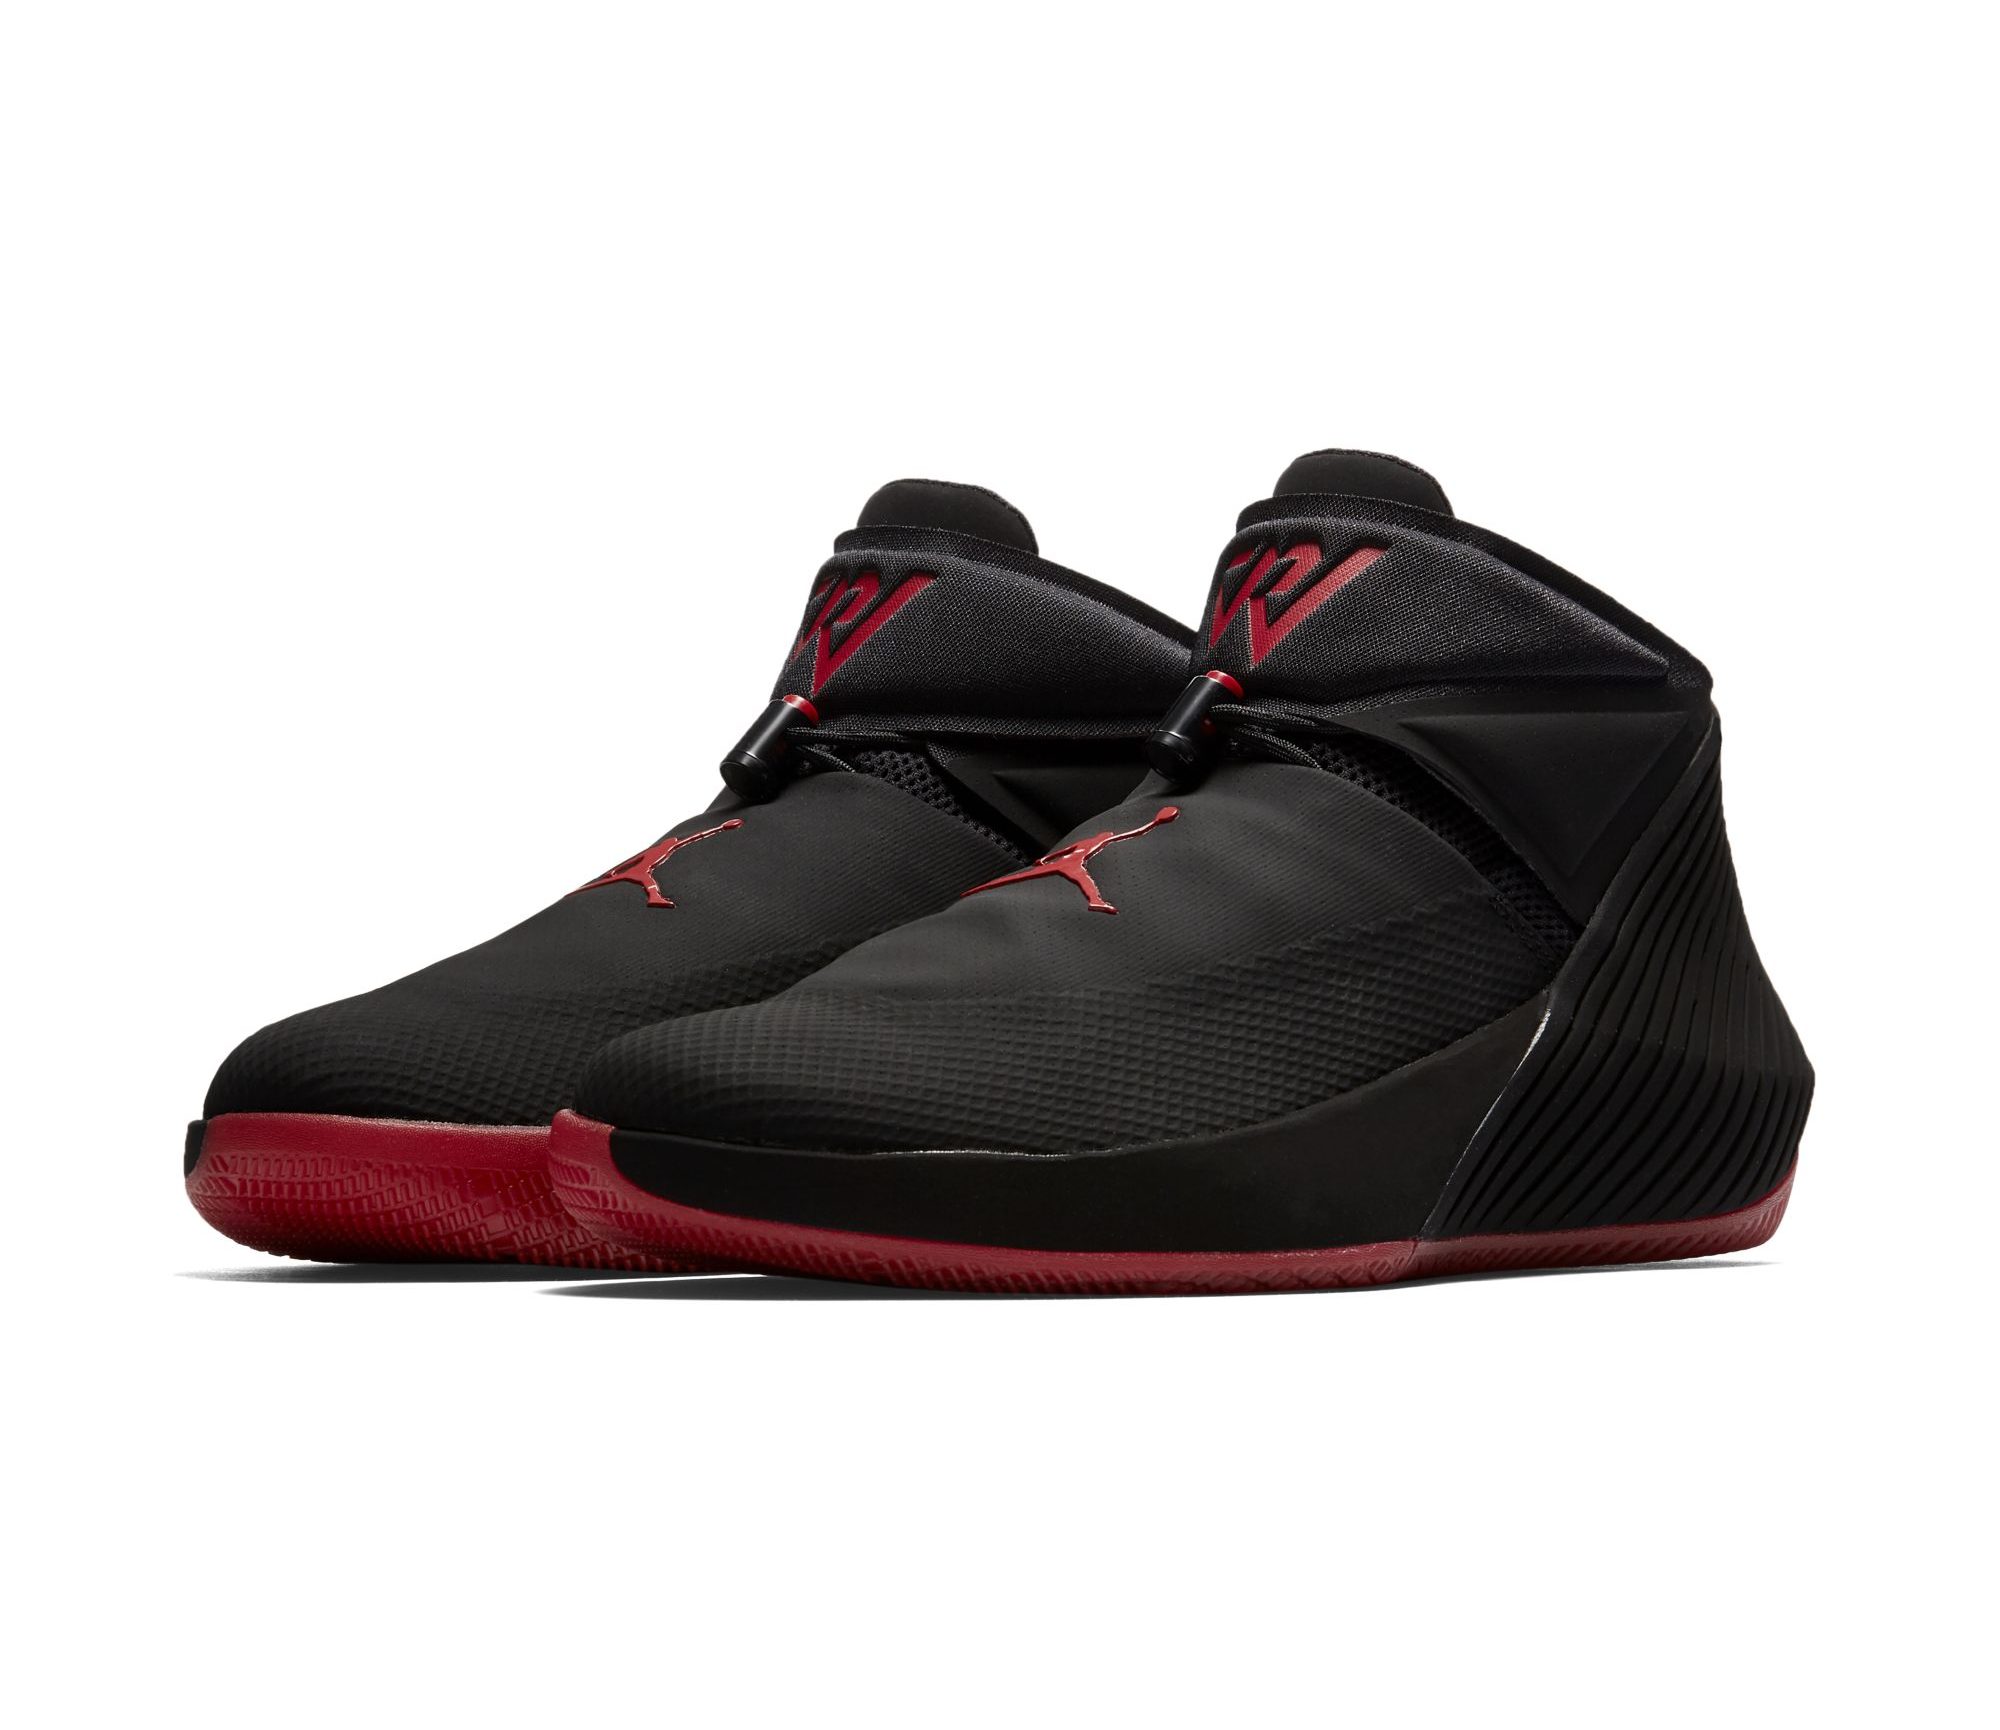 A Jordan Why Not Zero.1 in Black/Red is Dropping Soon - WearTesters